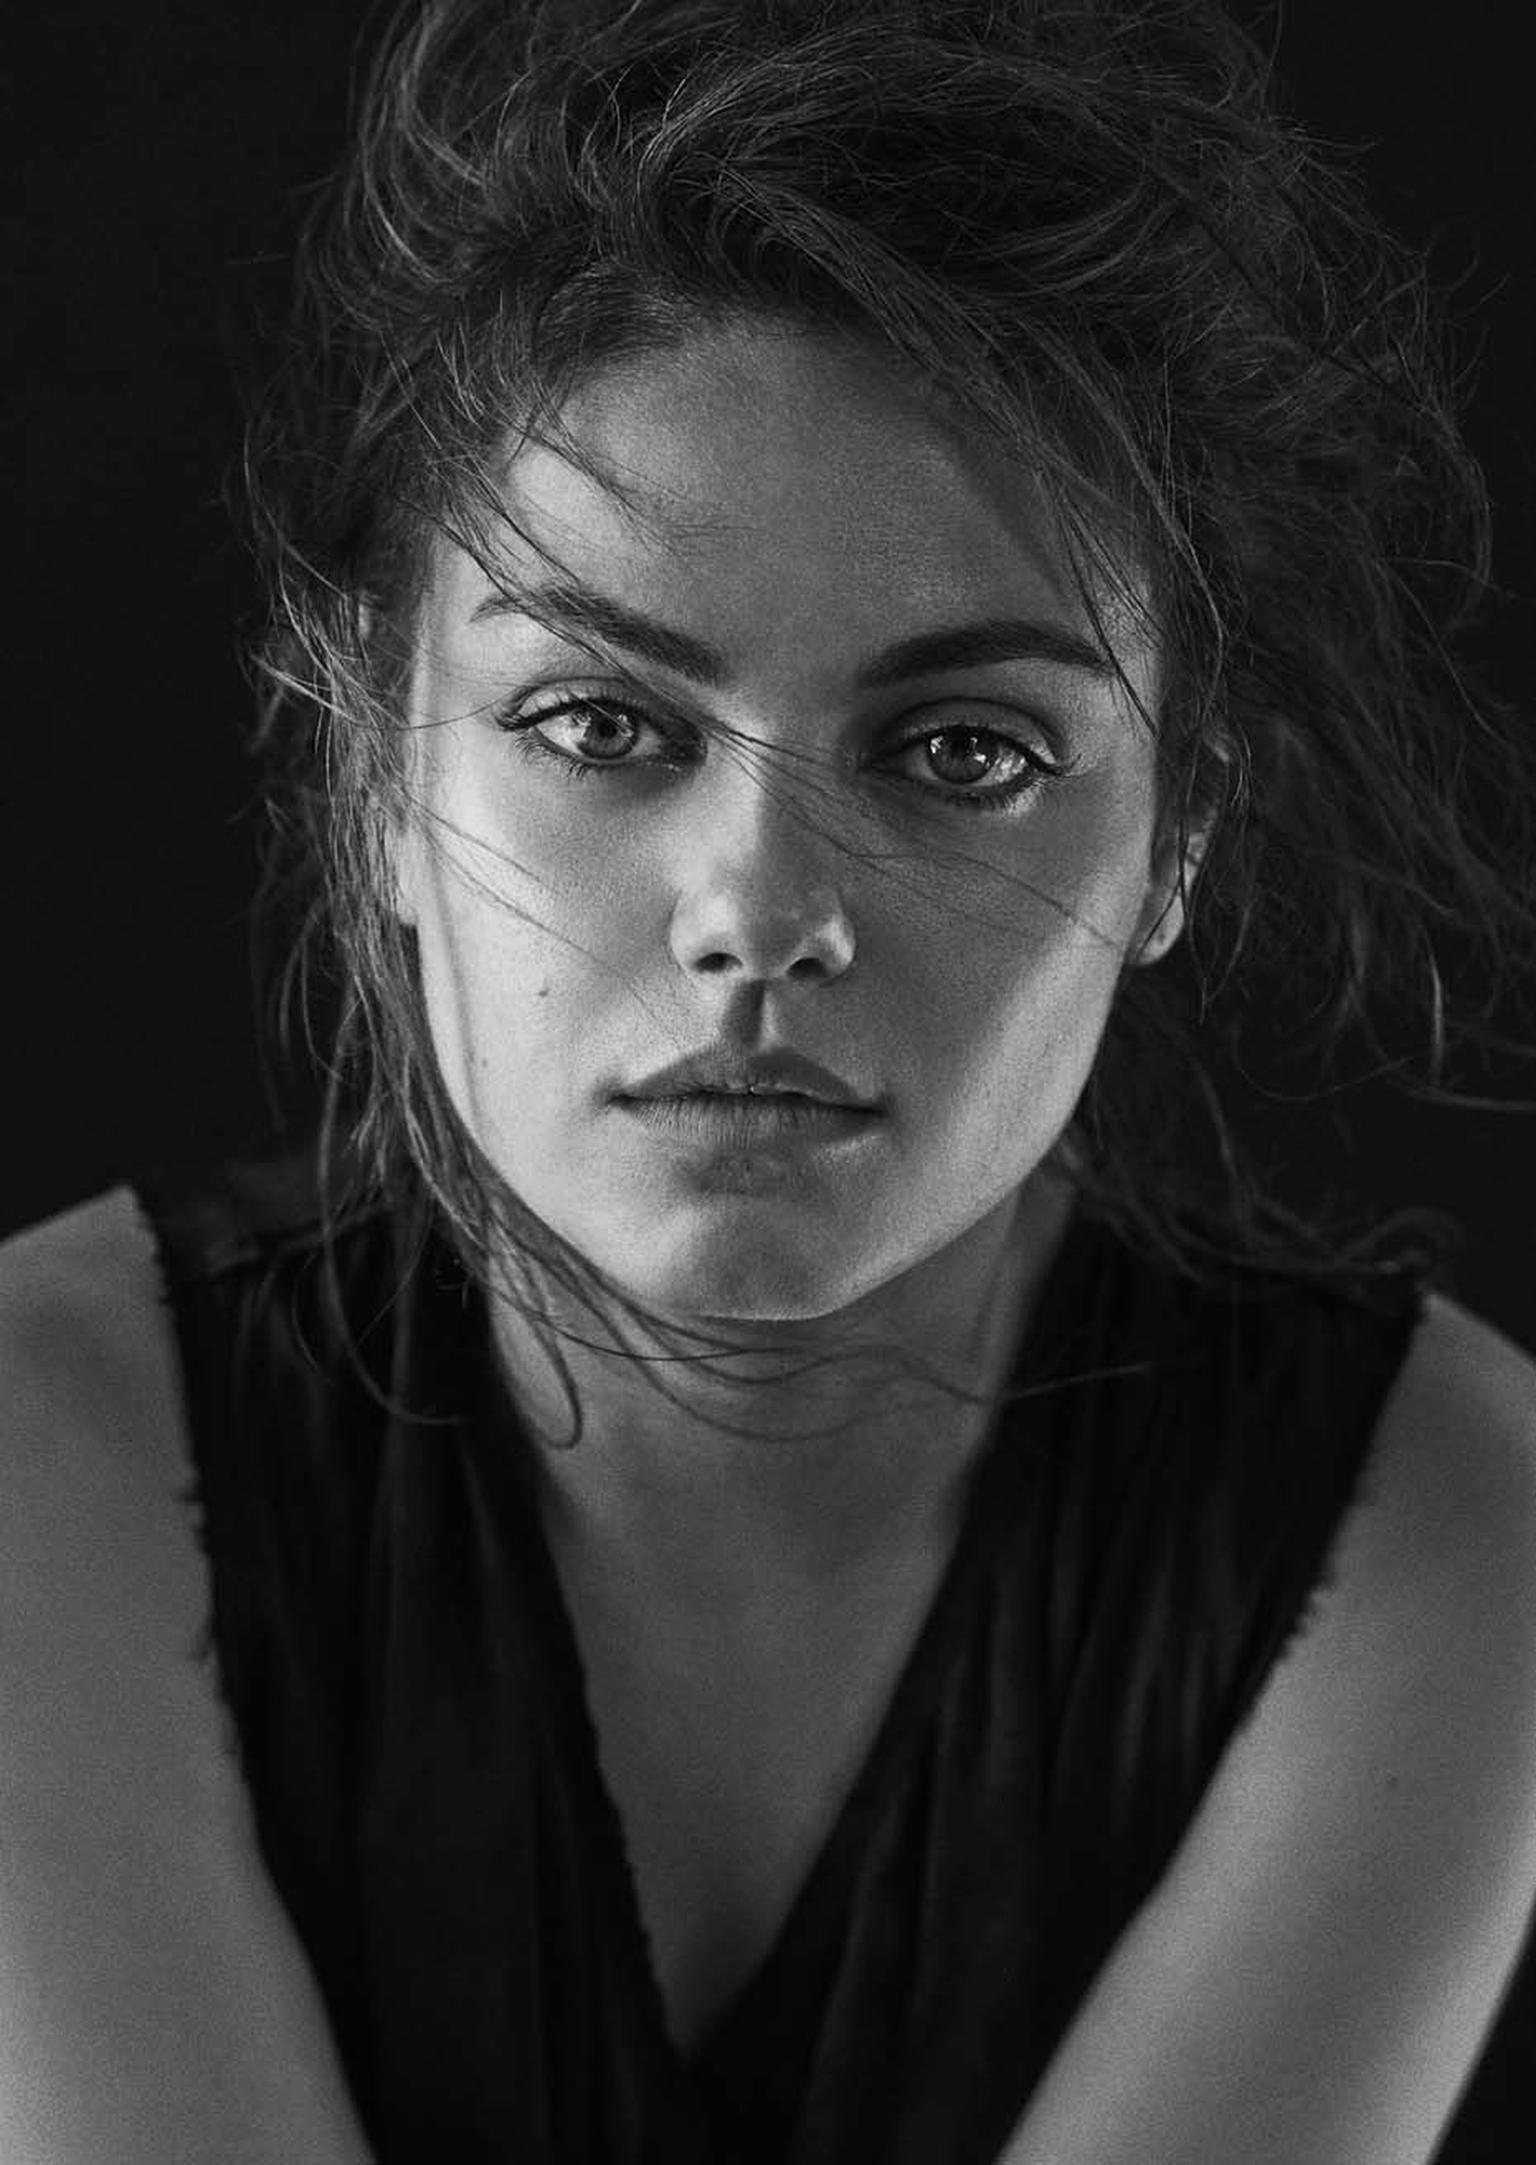 Gemfields' new ad campaign features a completely natural Mila Kunis